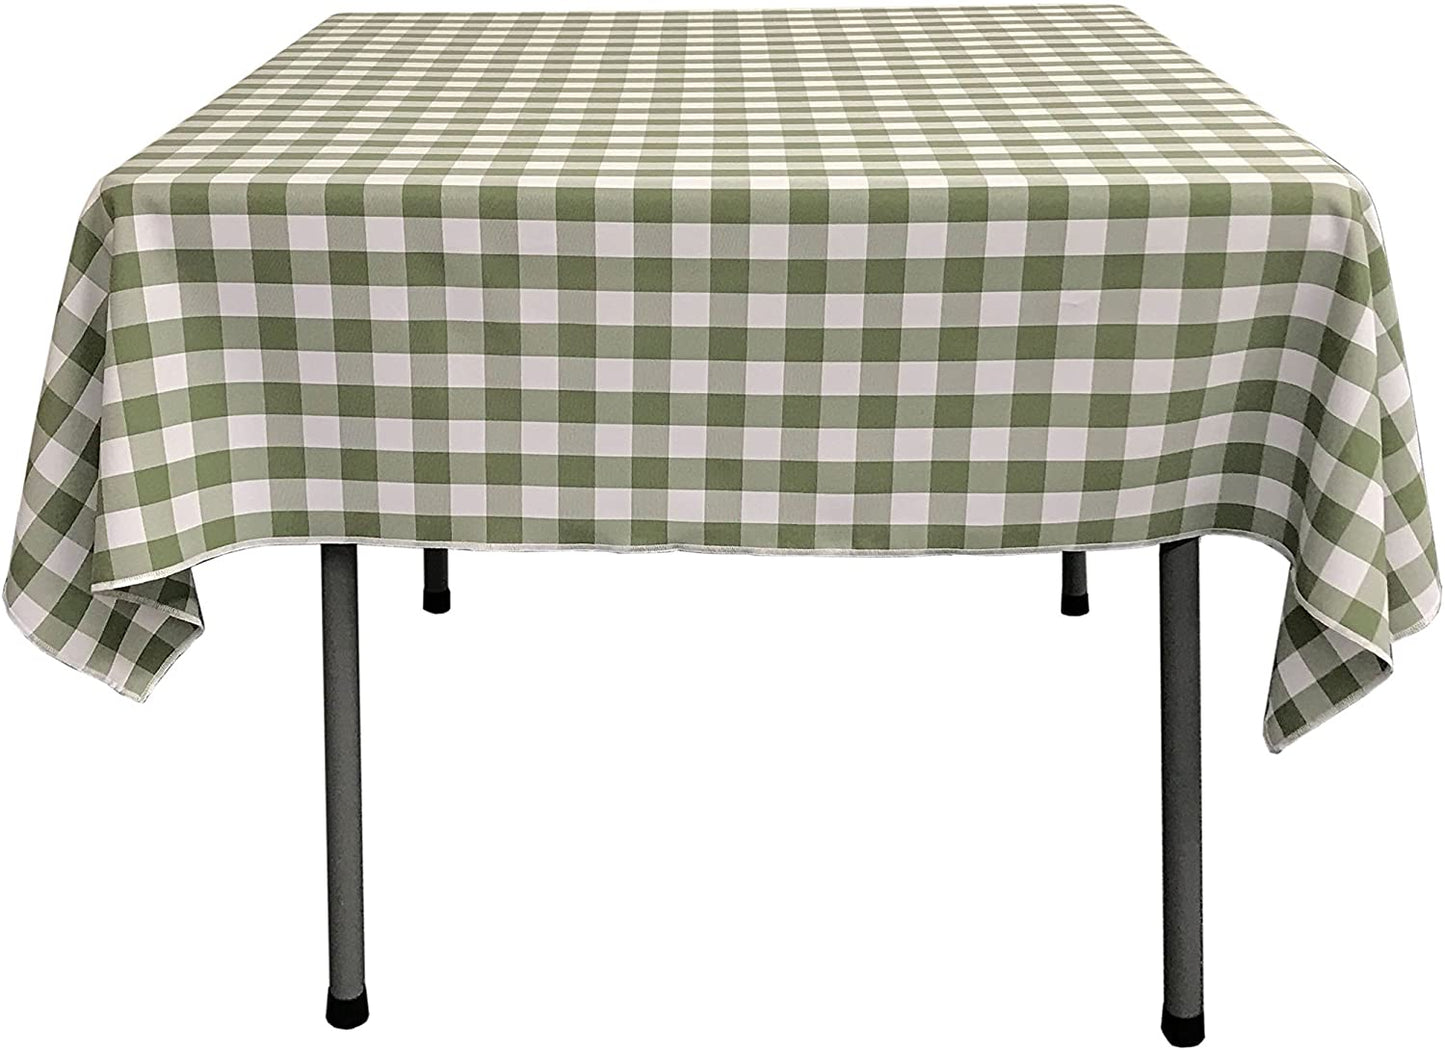 Gingham Checkered Square Tablecloth Apple Green and White